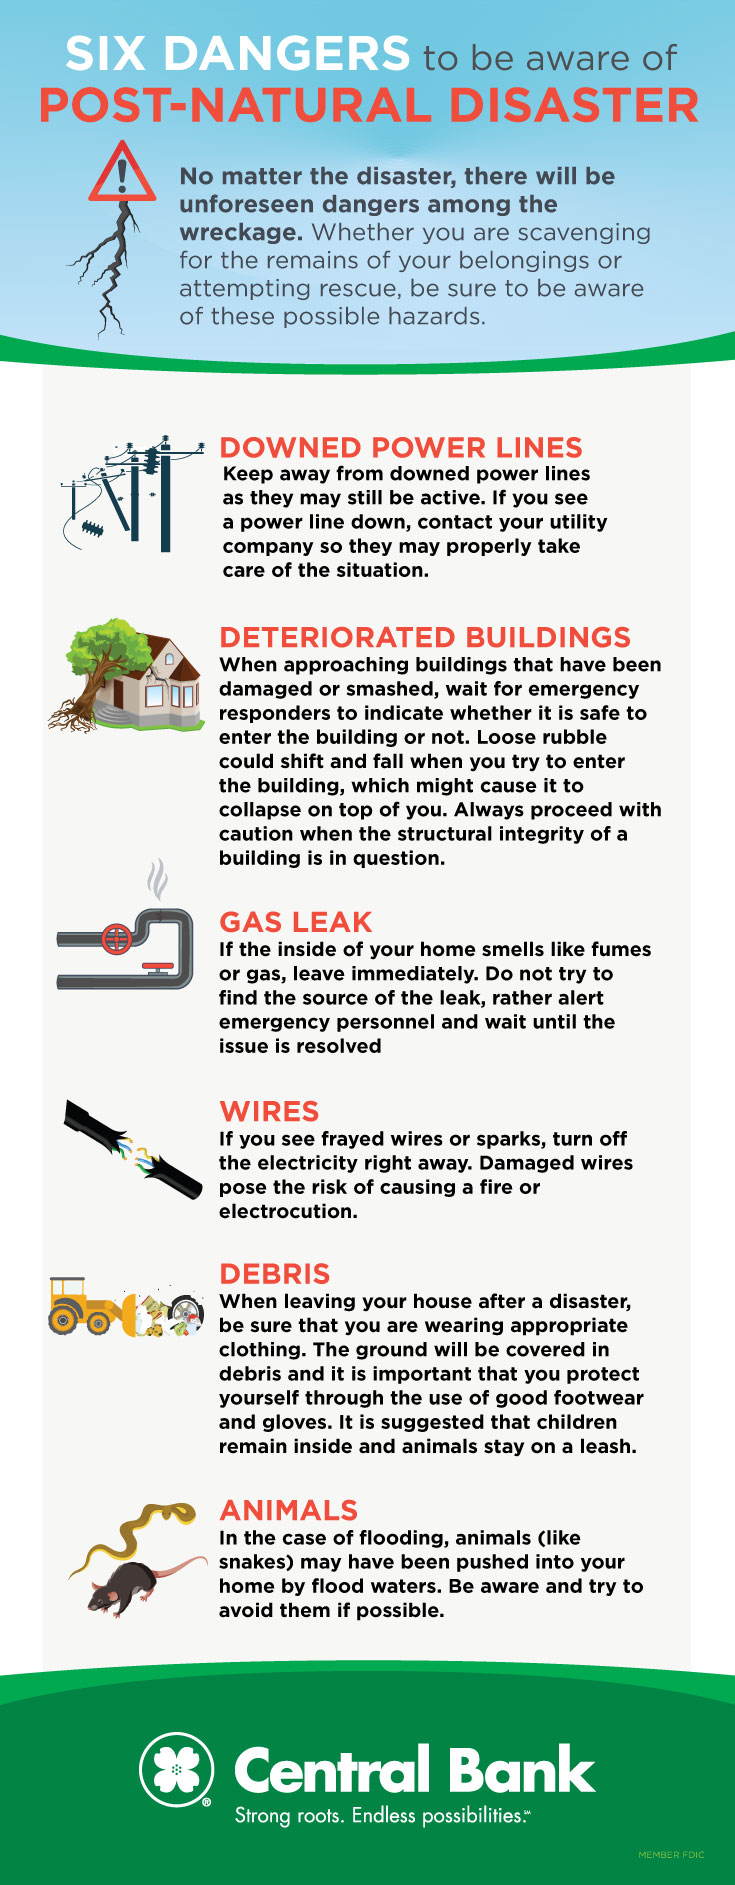 An infographic outlining six dangers to be aware of post-disaster